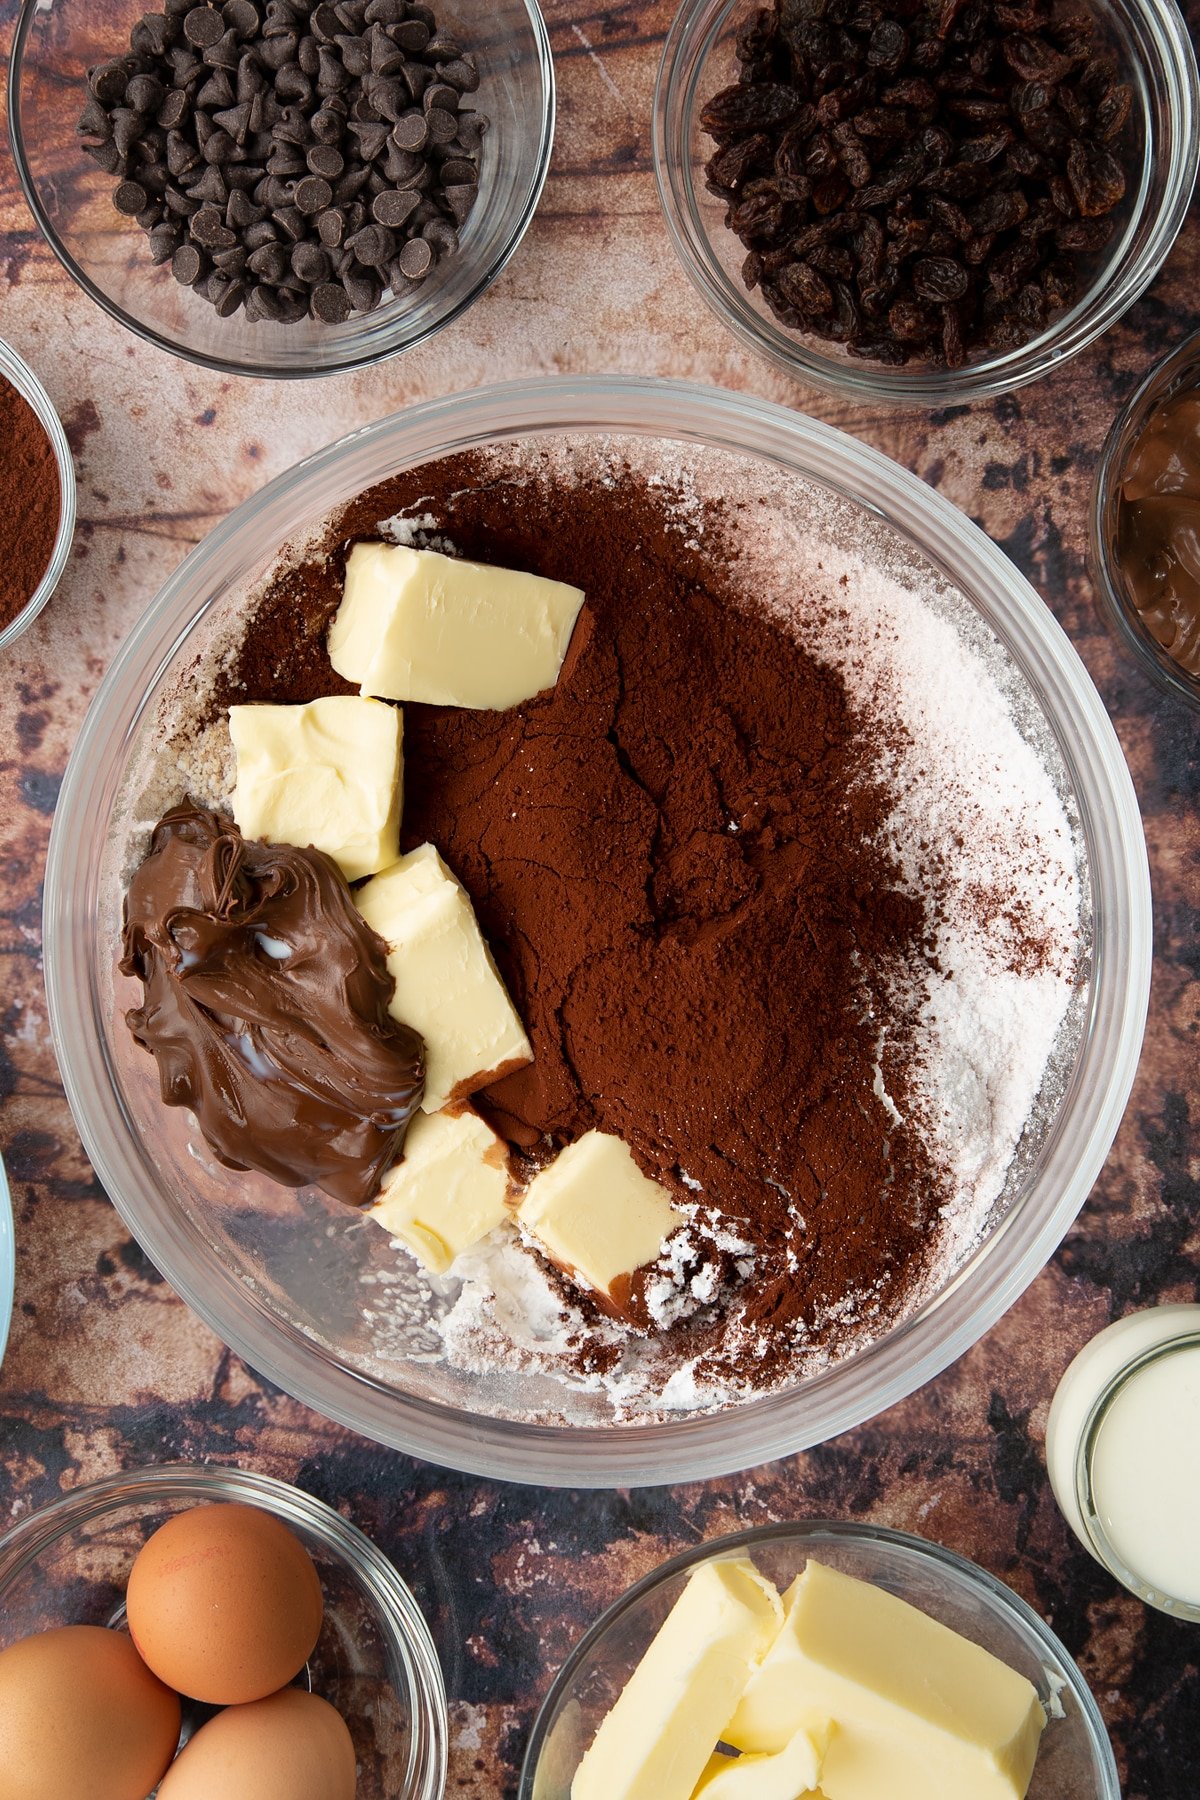 Nutella, butter, milk, cocoa and icing sugar in a bowl. Ingredients to make chocolate raisin muffins surround the bowl.